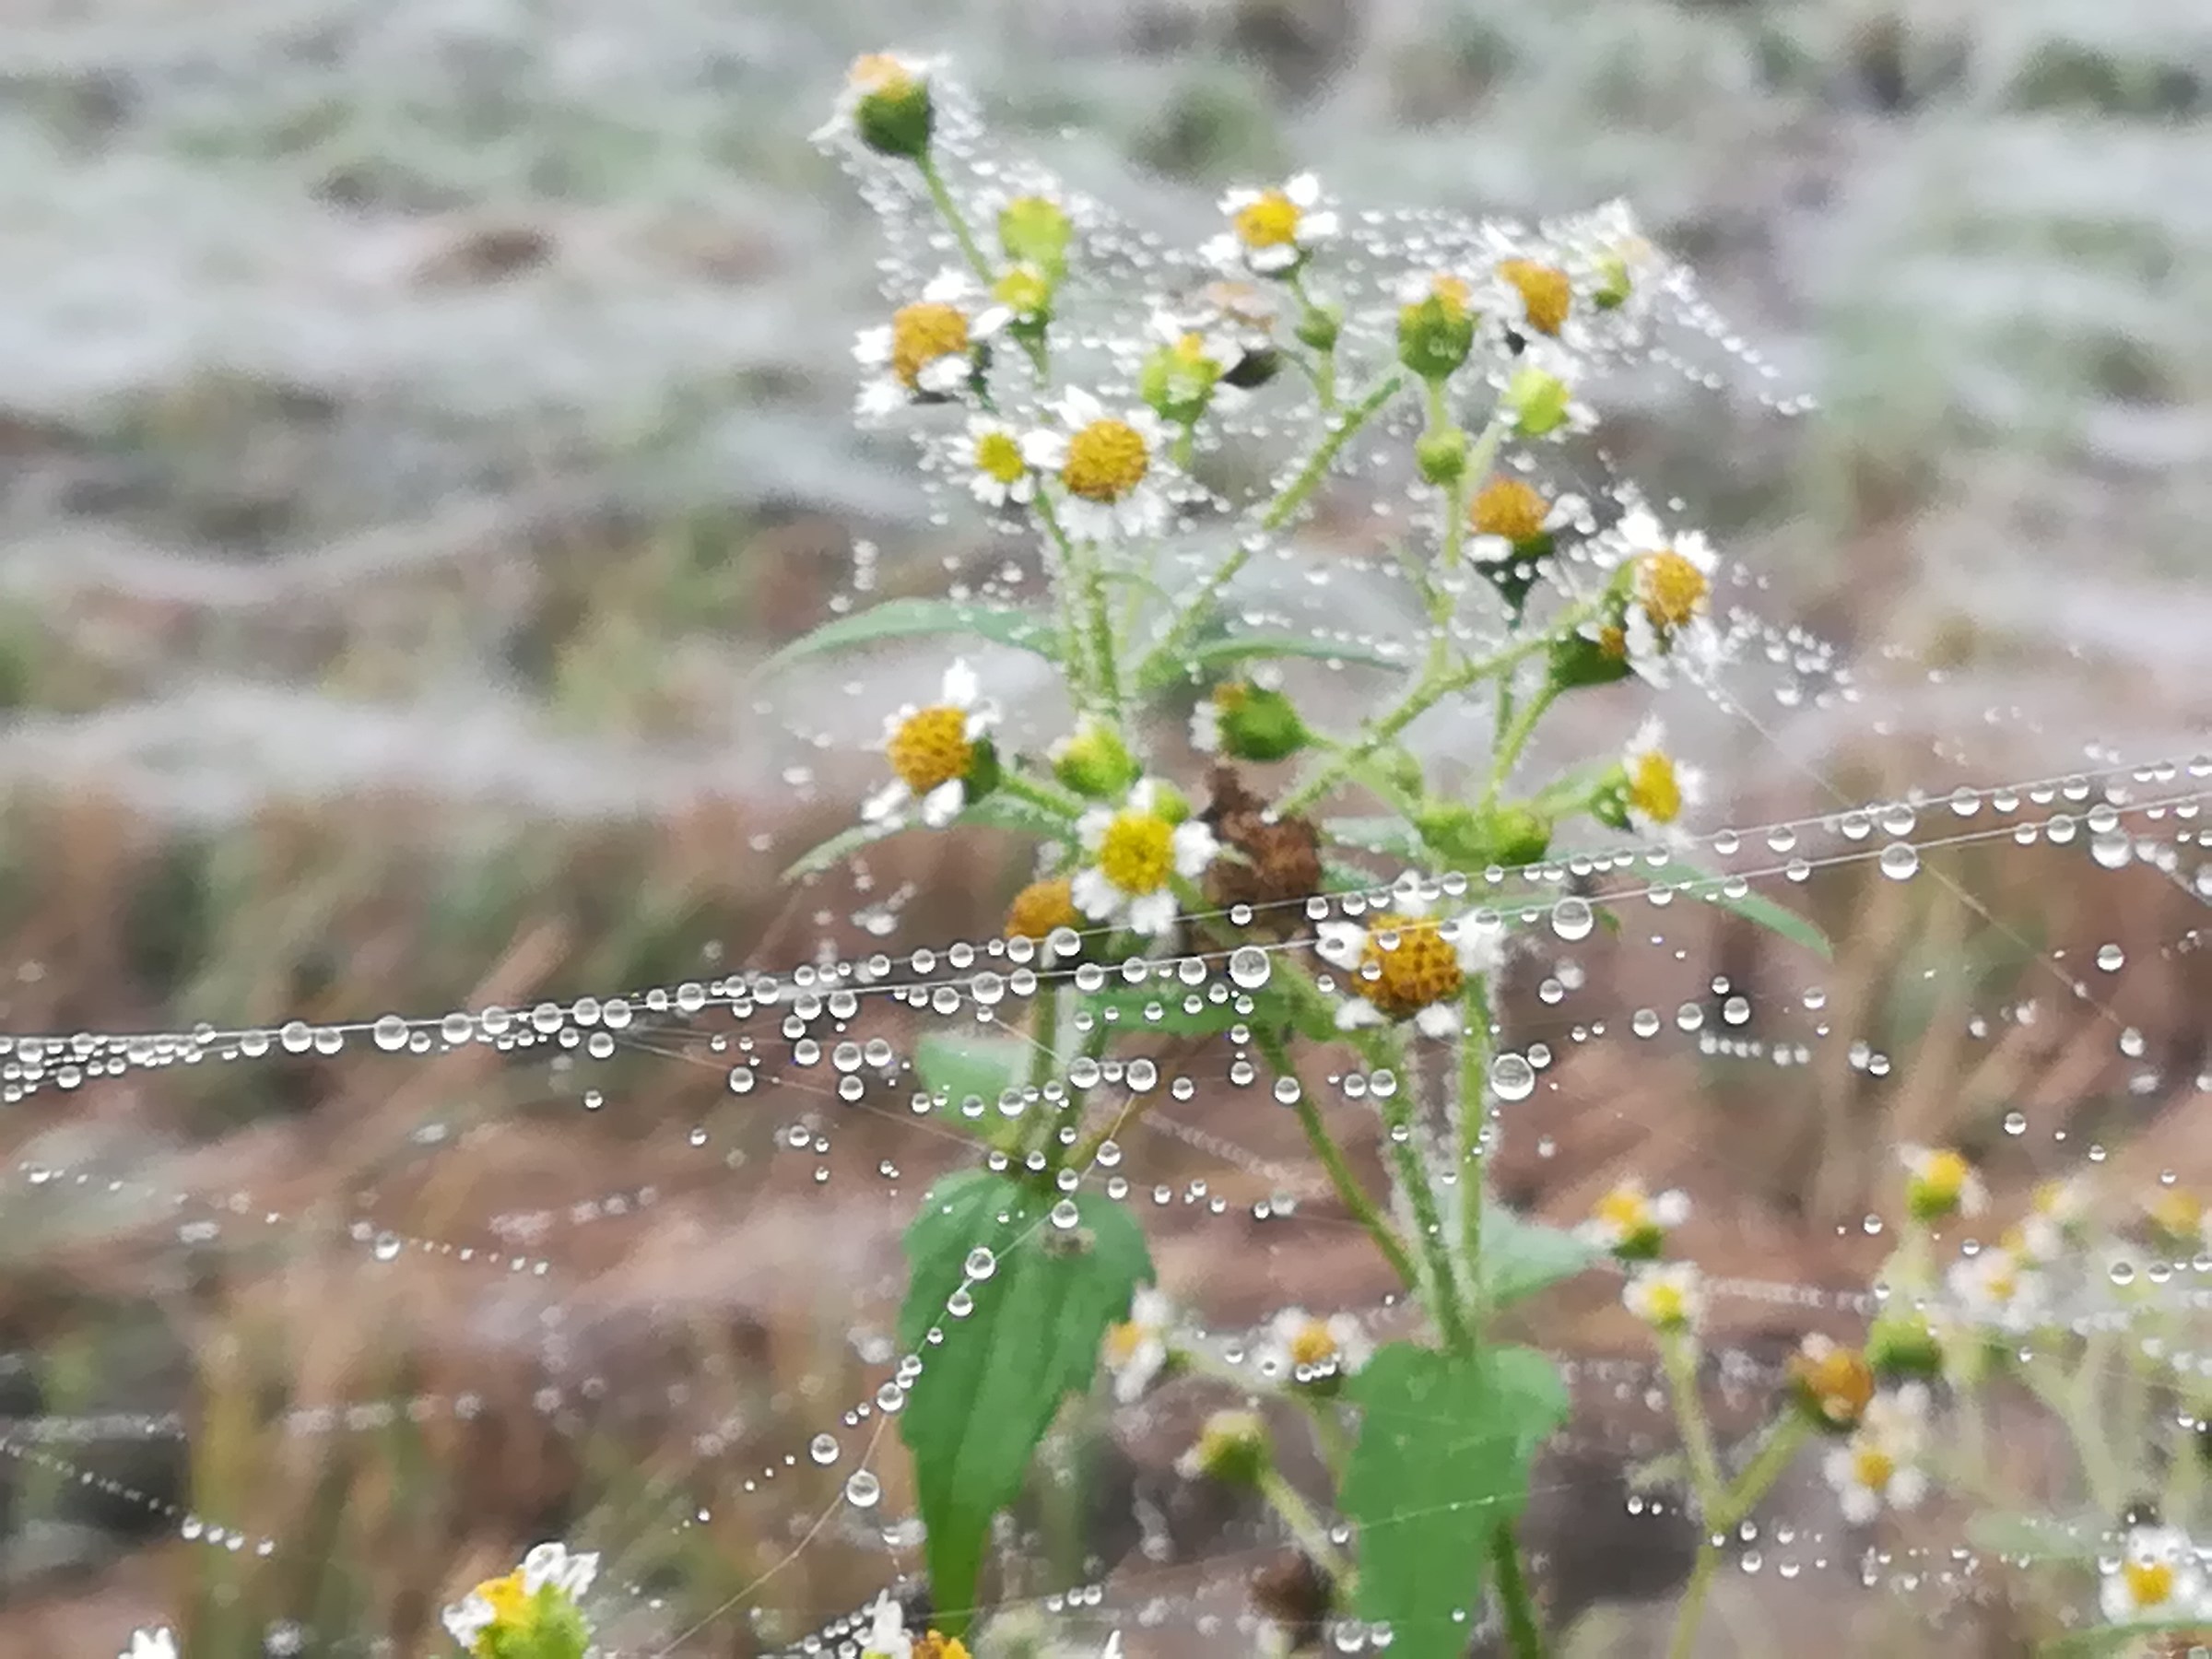 A daisy covered with cobwebs ...